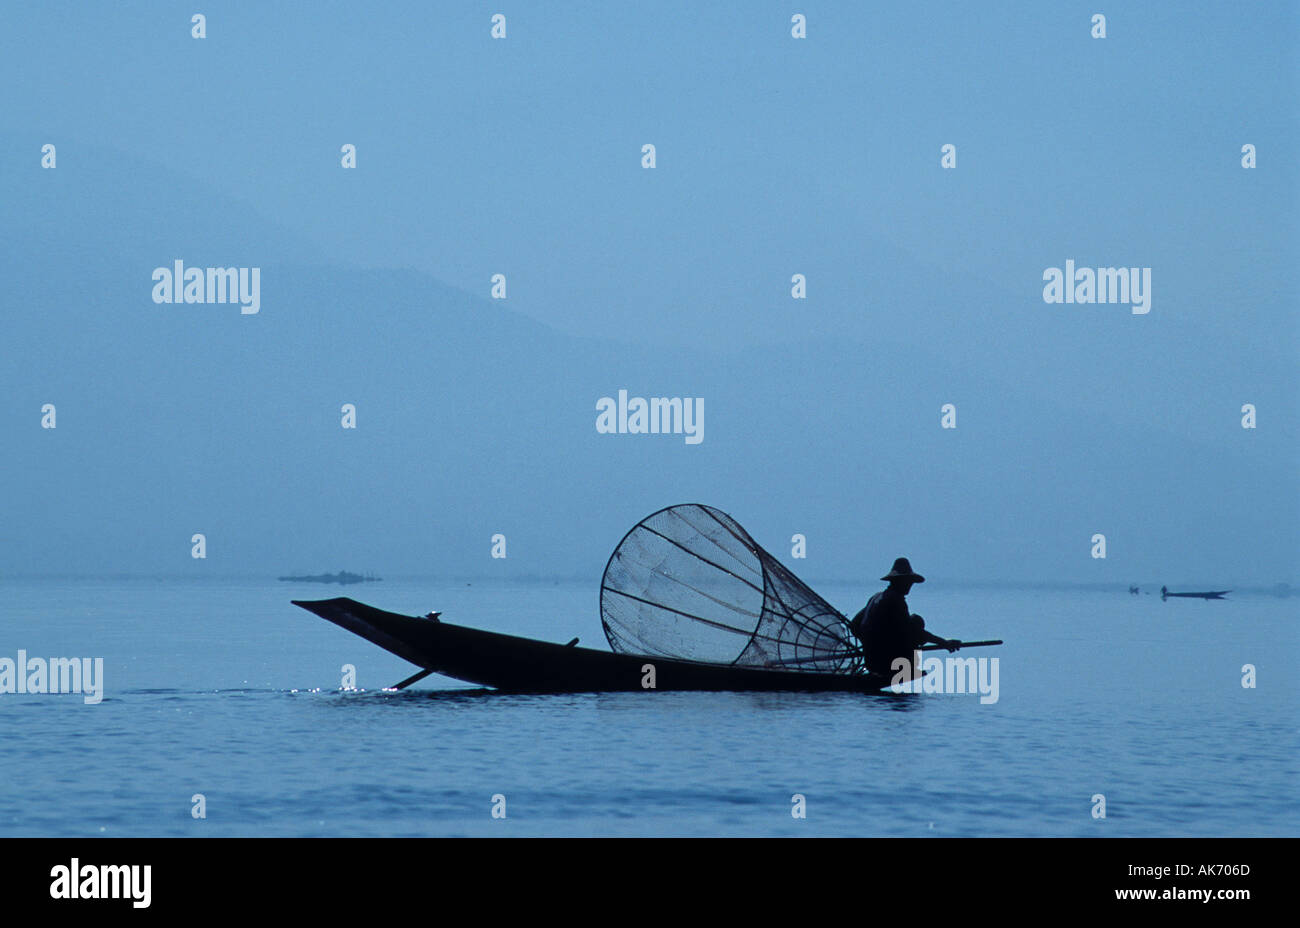 Silhouette of a Fisherman in Rowing Boat on the Inle Lake, Burma Stock Photo